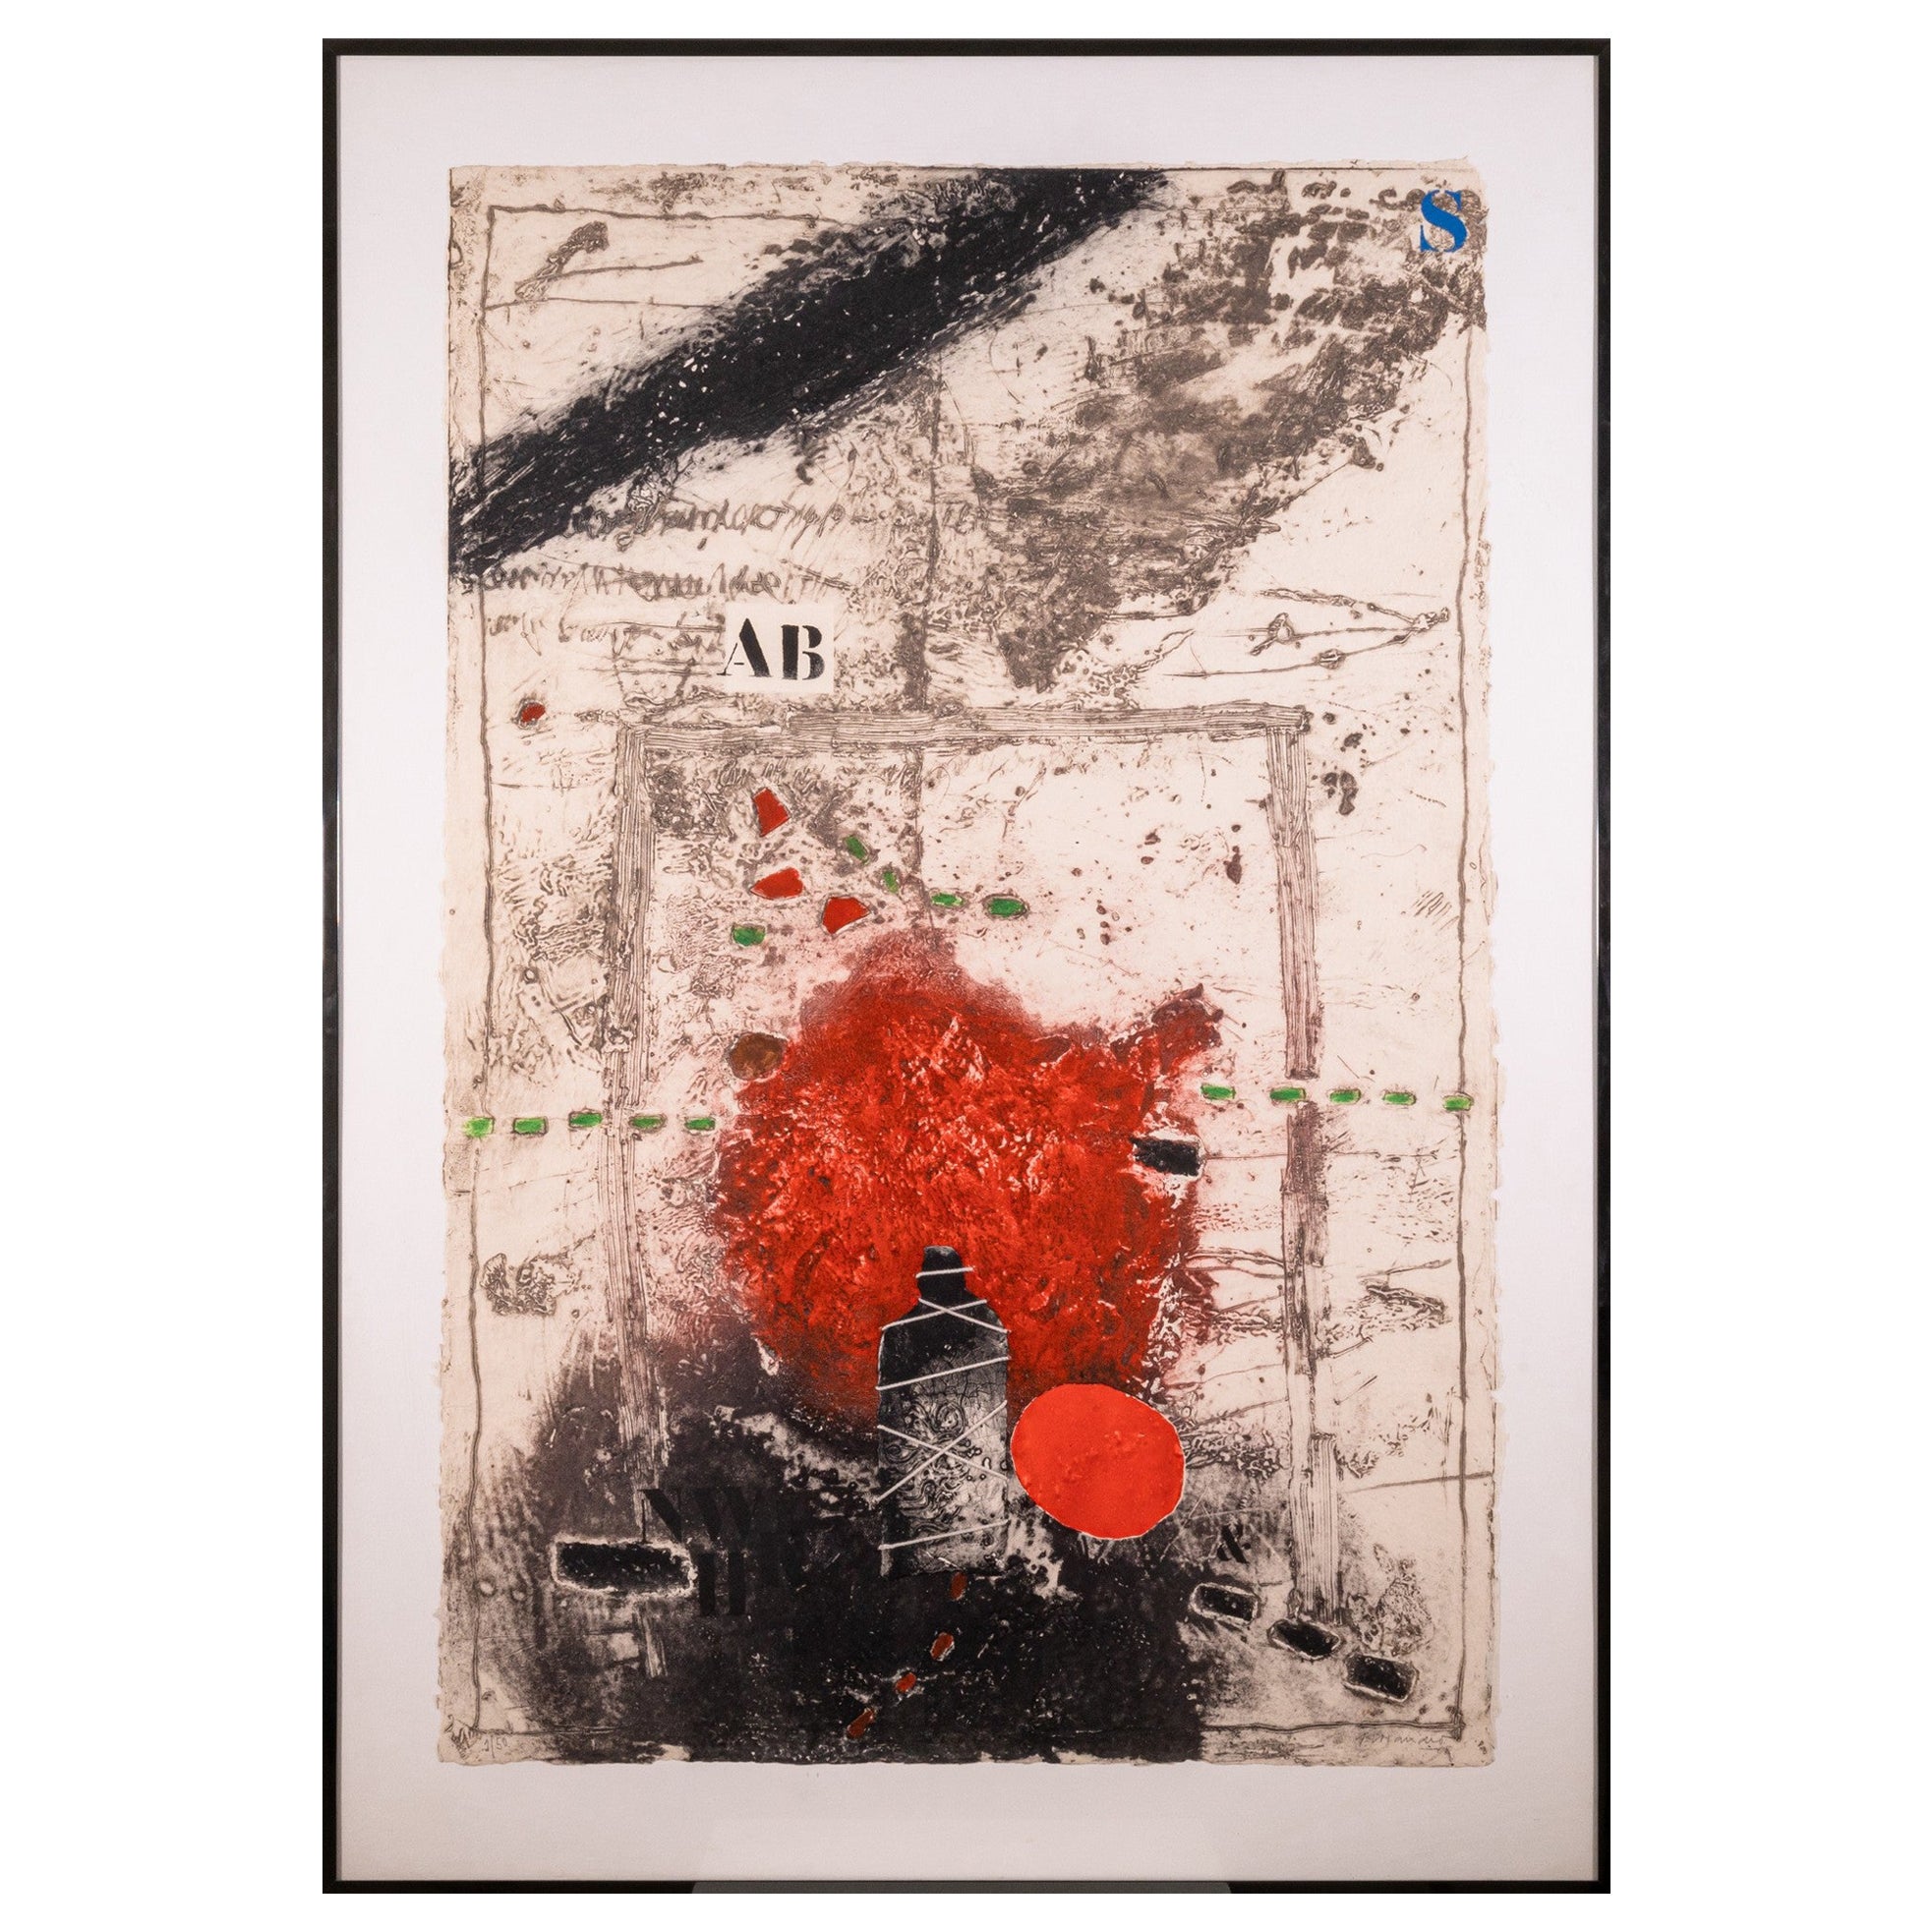 James Coignard Signed Carborundum Etching on Paper from Otage et Rouge Series For Sale